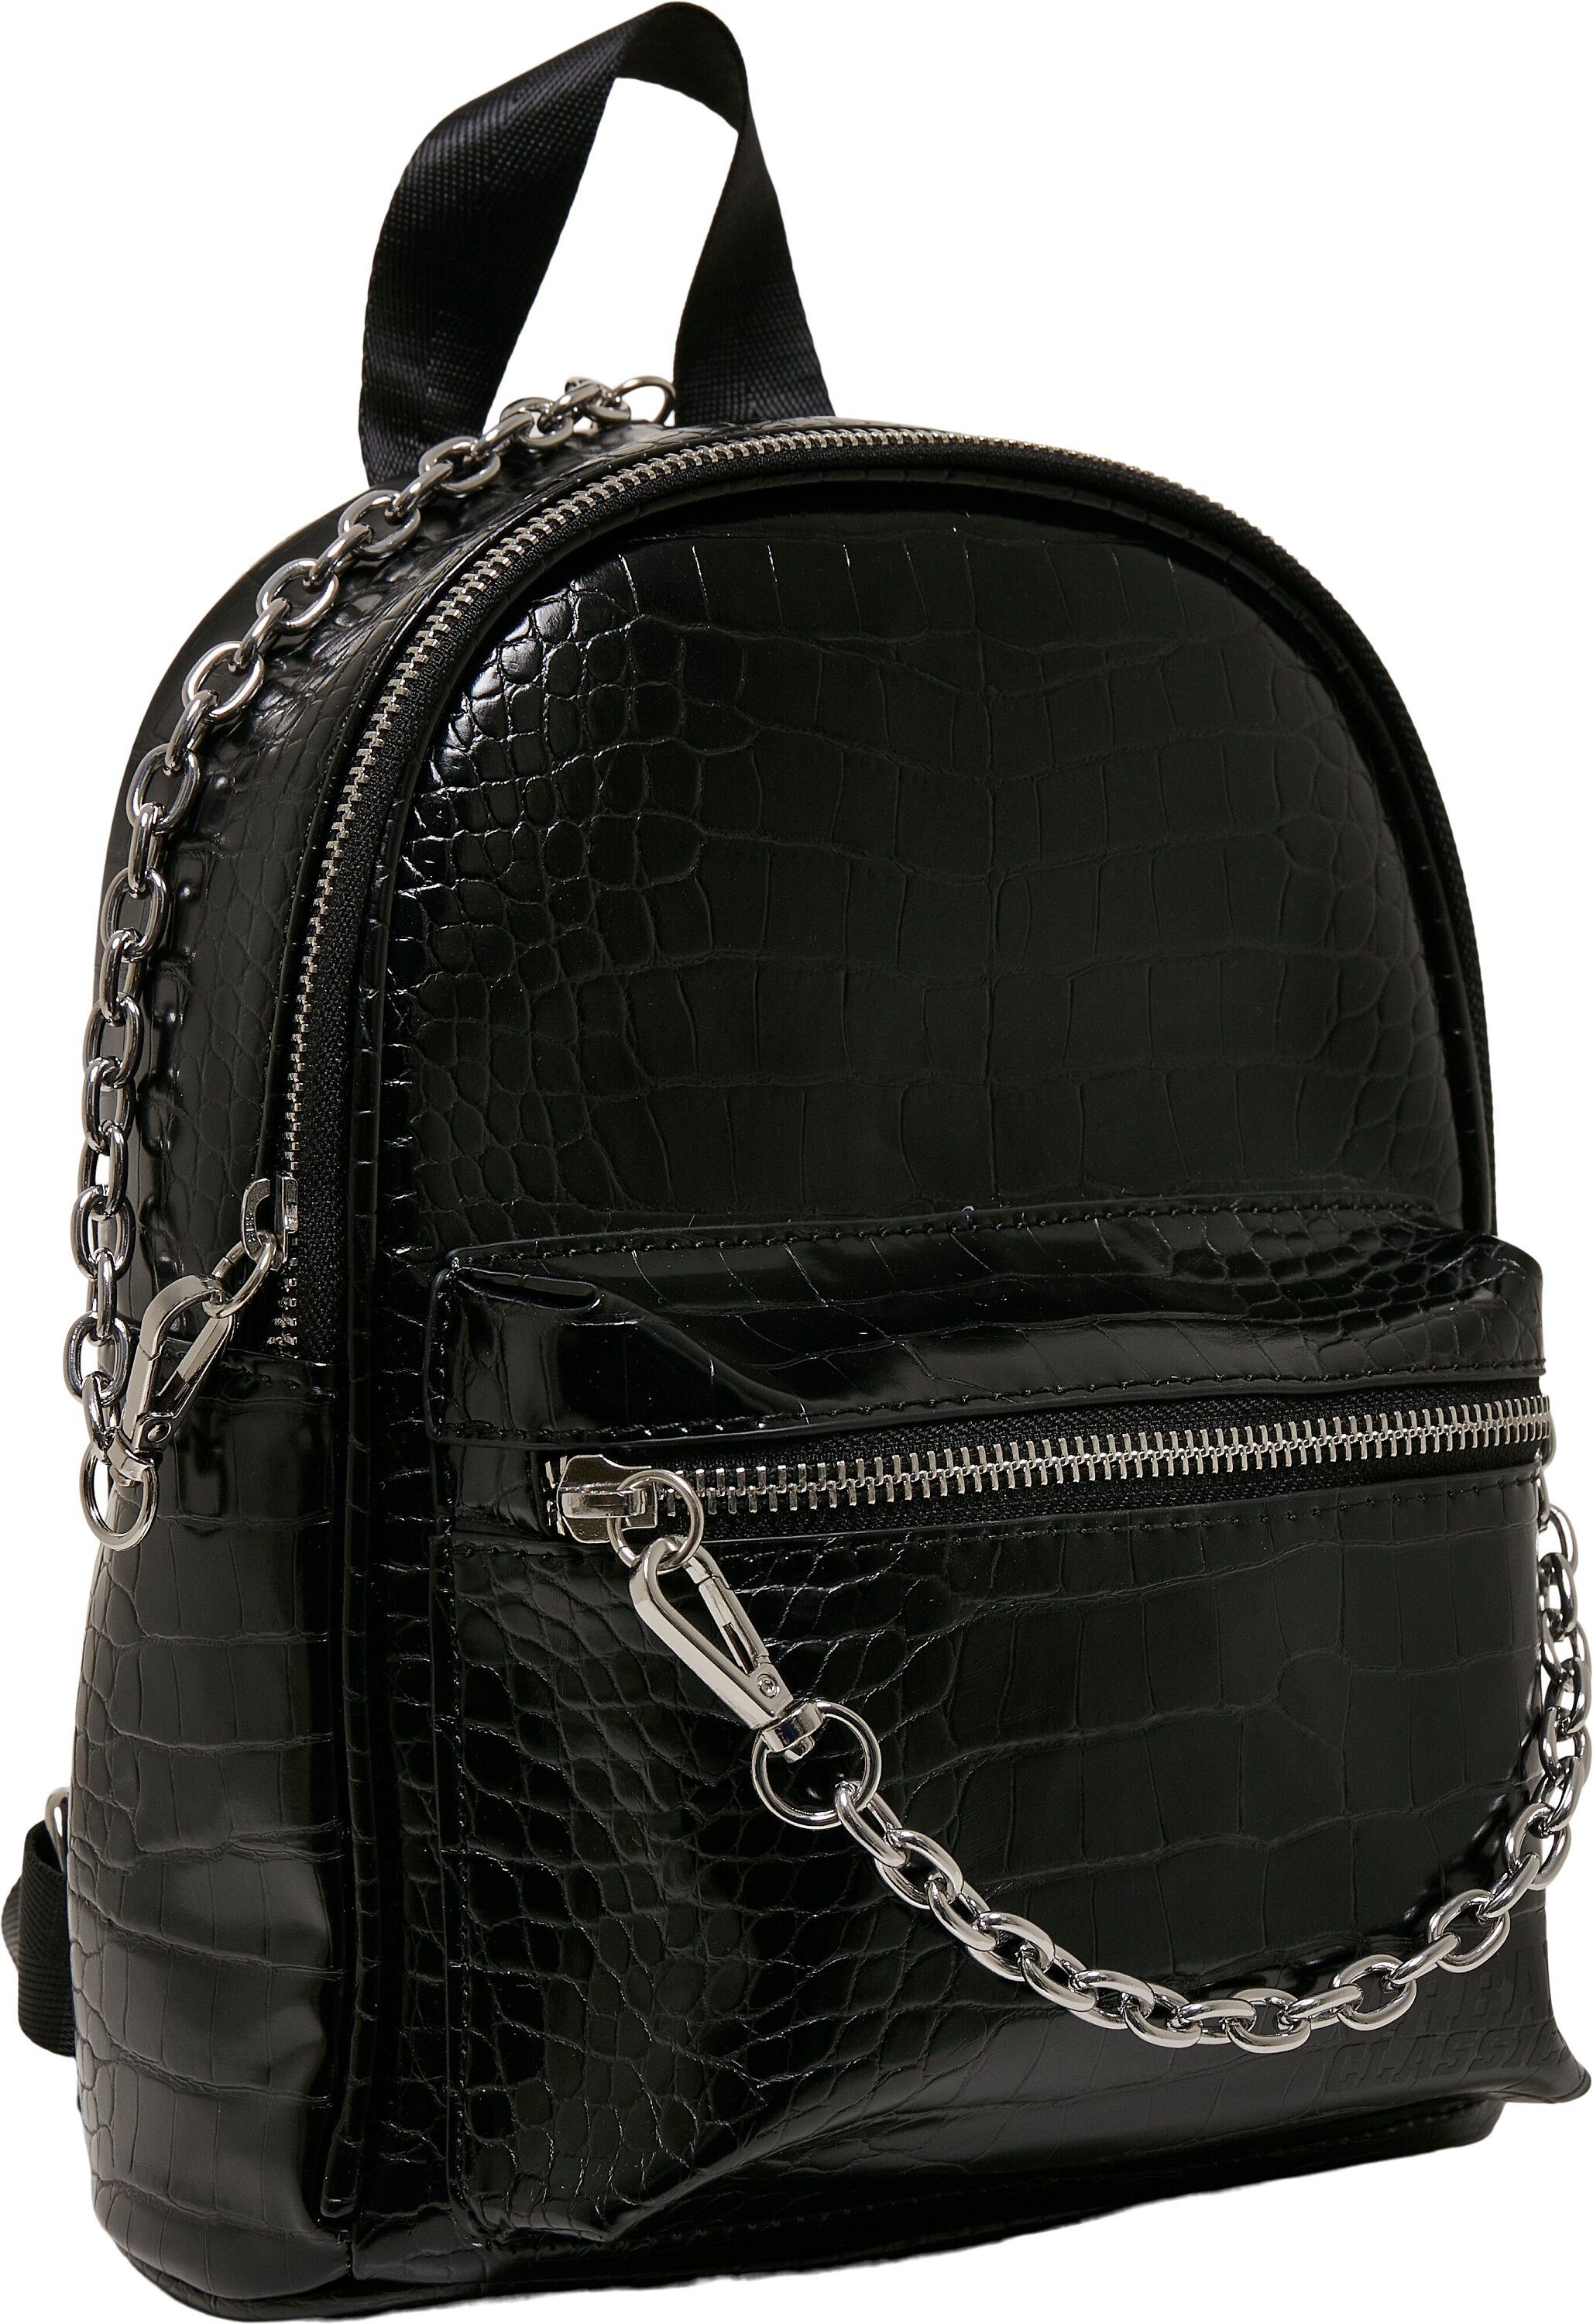 Leather Croco CLASSICS Backpack Rucksack Unisex Synthetic URBAN